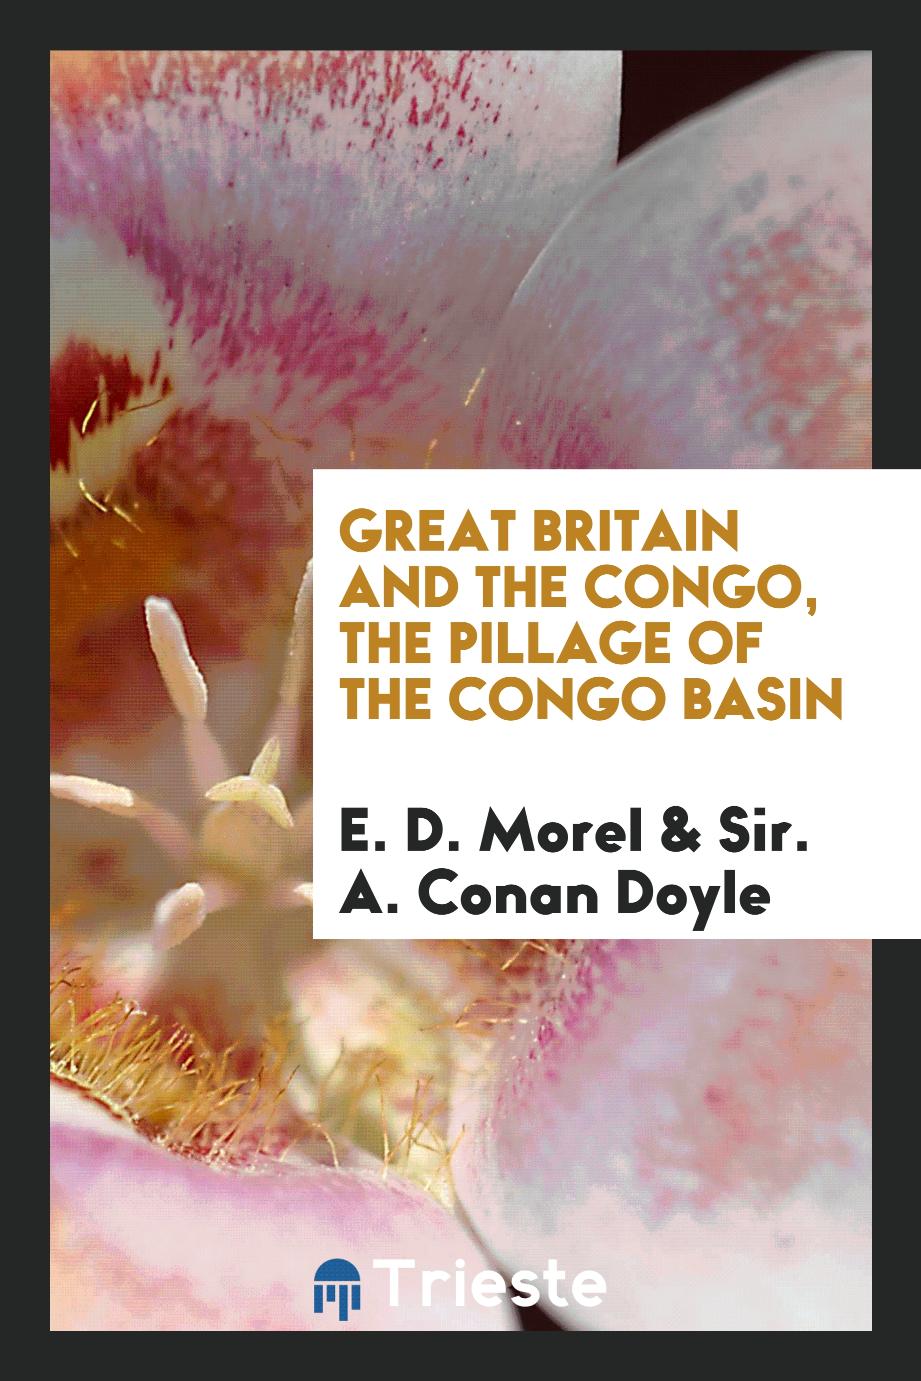 Great Britain and the Congo, the Pillage of the Congo Basin